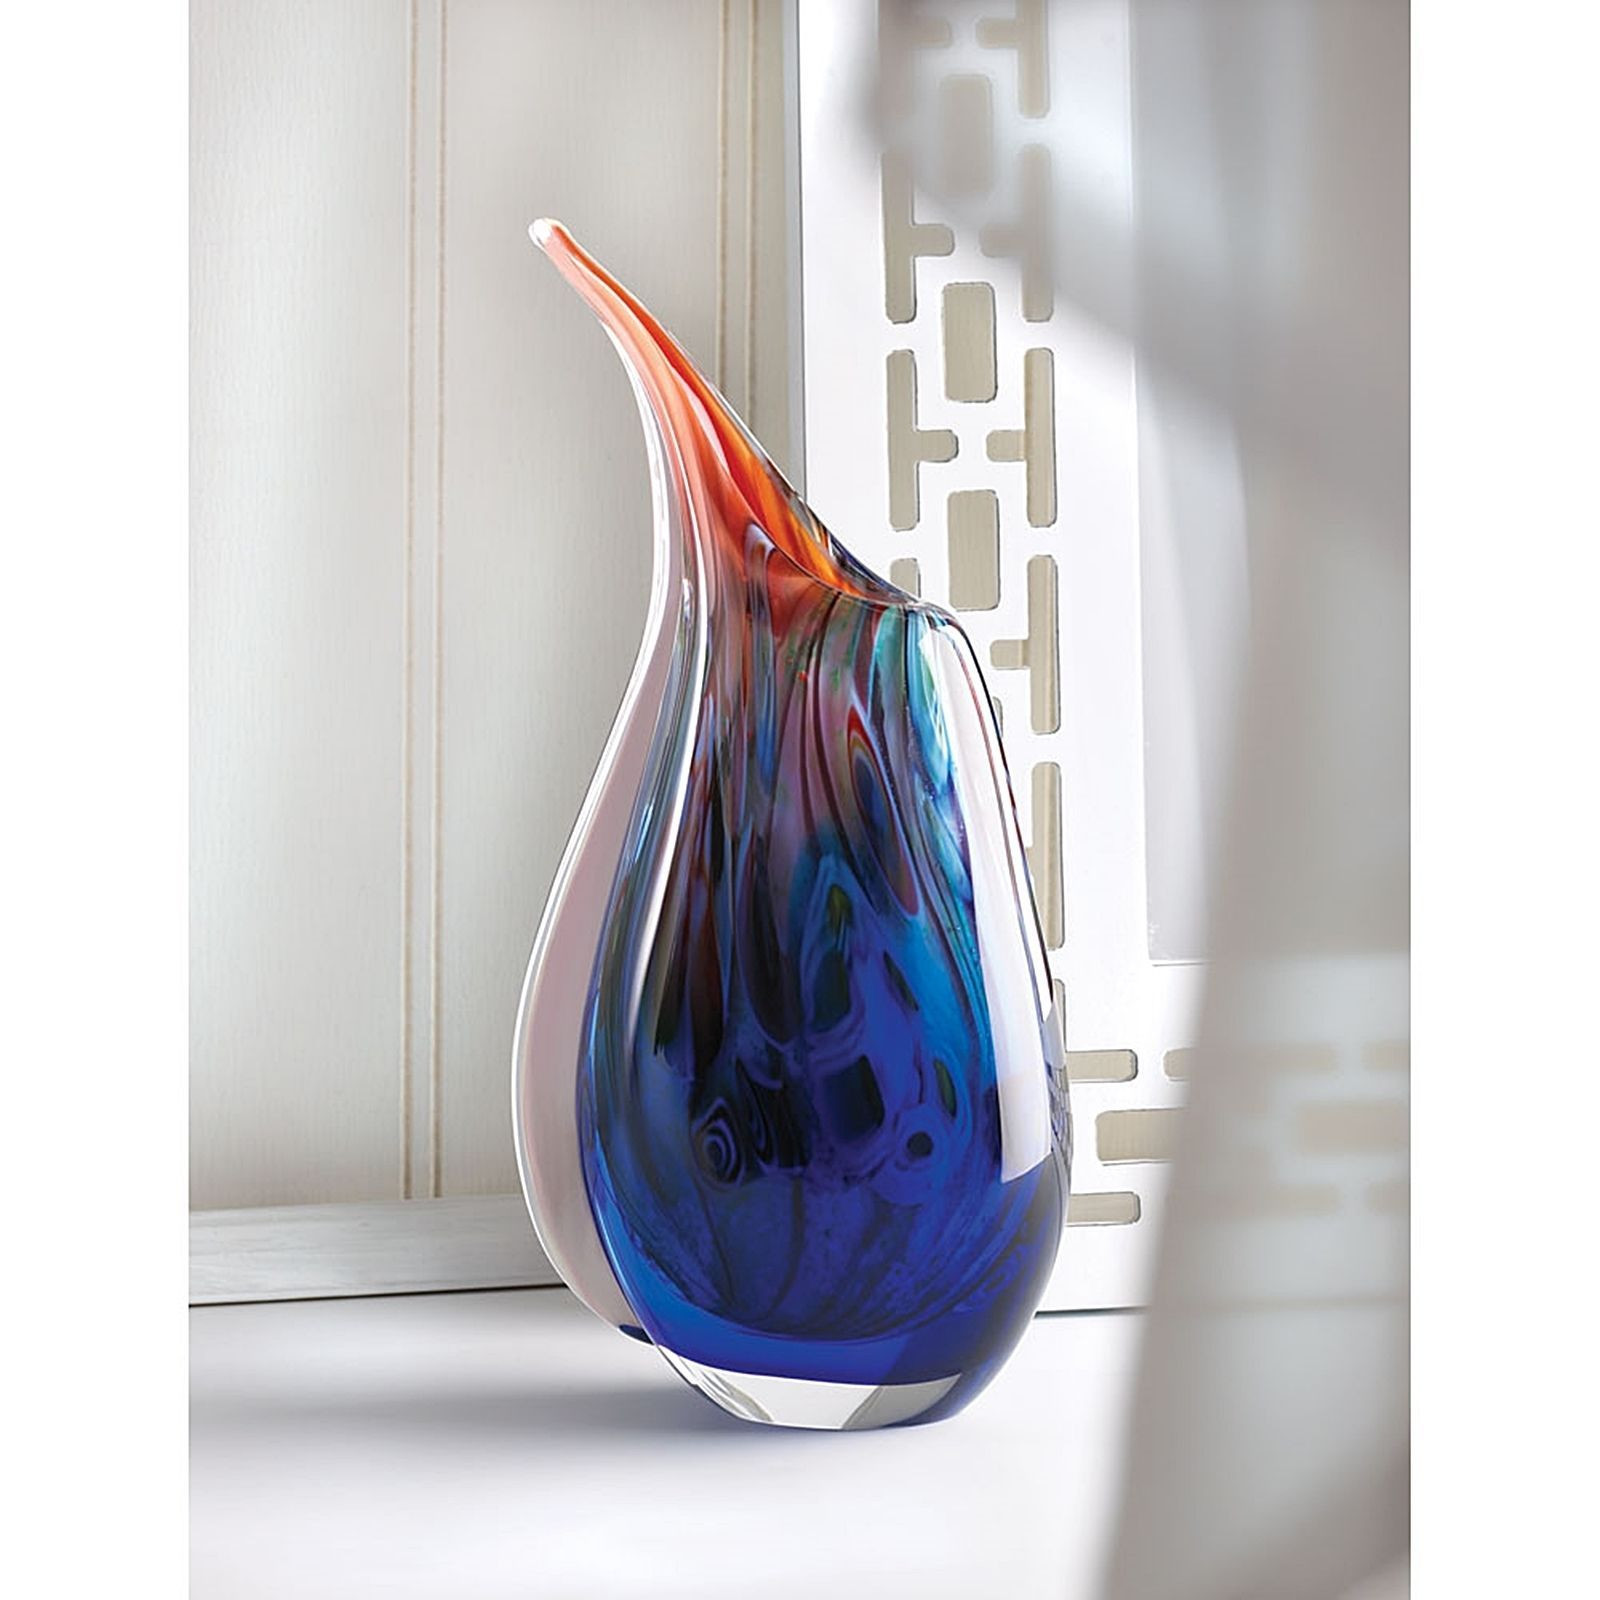 12 Stylish Large Colored Vases 2024 free download large colored vases of the dream artistic glass vase features a splendor of colors captured with the dream artistic glass vase features a splendor of colors captured in glass with its